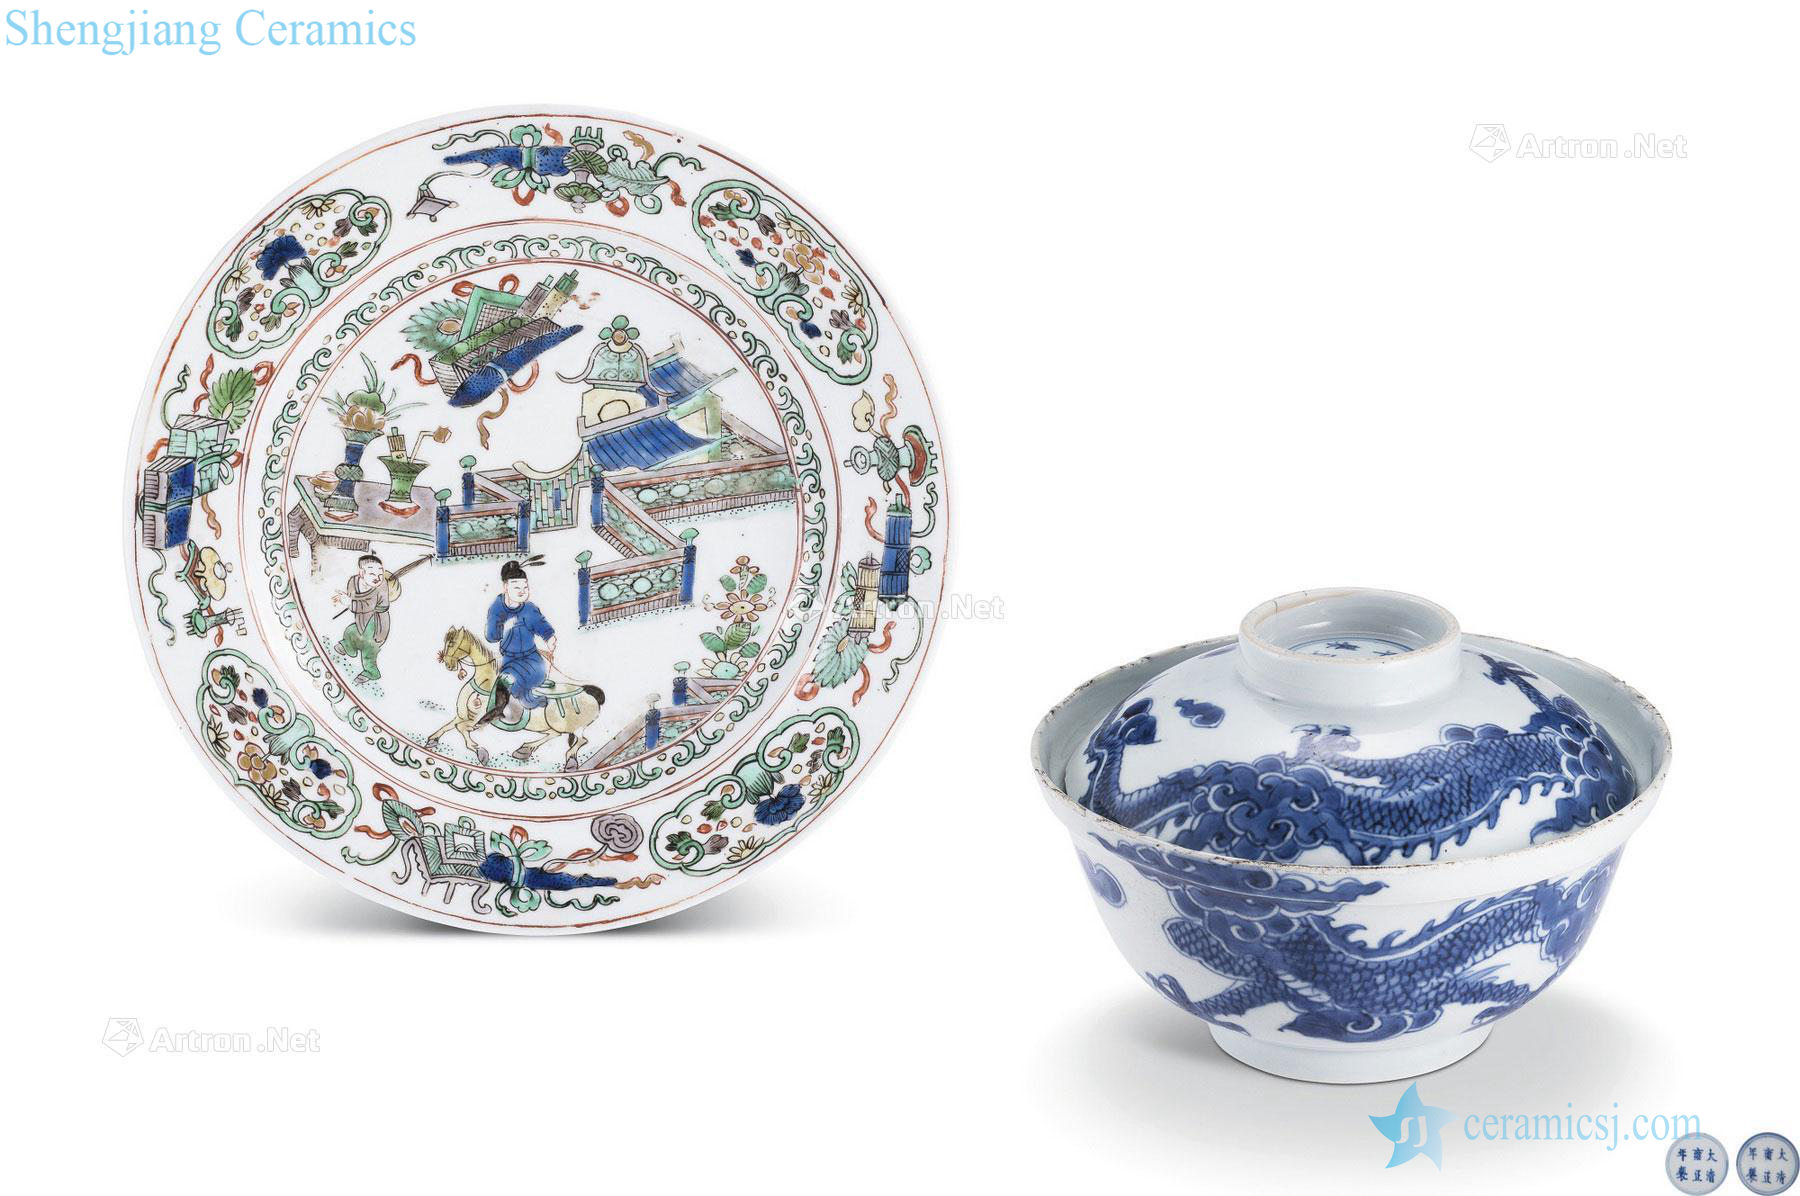 Qing yongzheng Blue and white YunLongWen cover figure plate 盌 盌 and colorful characters of the reign of emperor kangxi